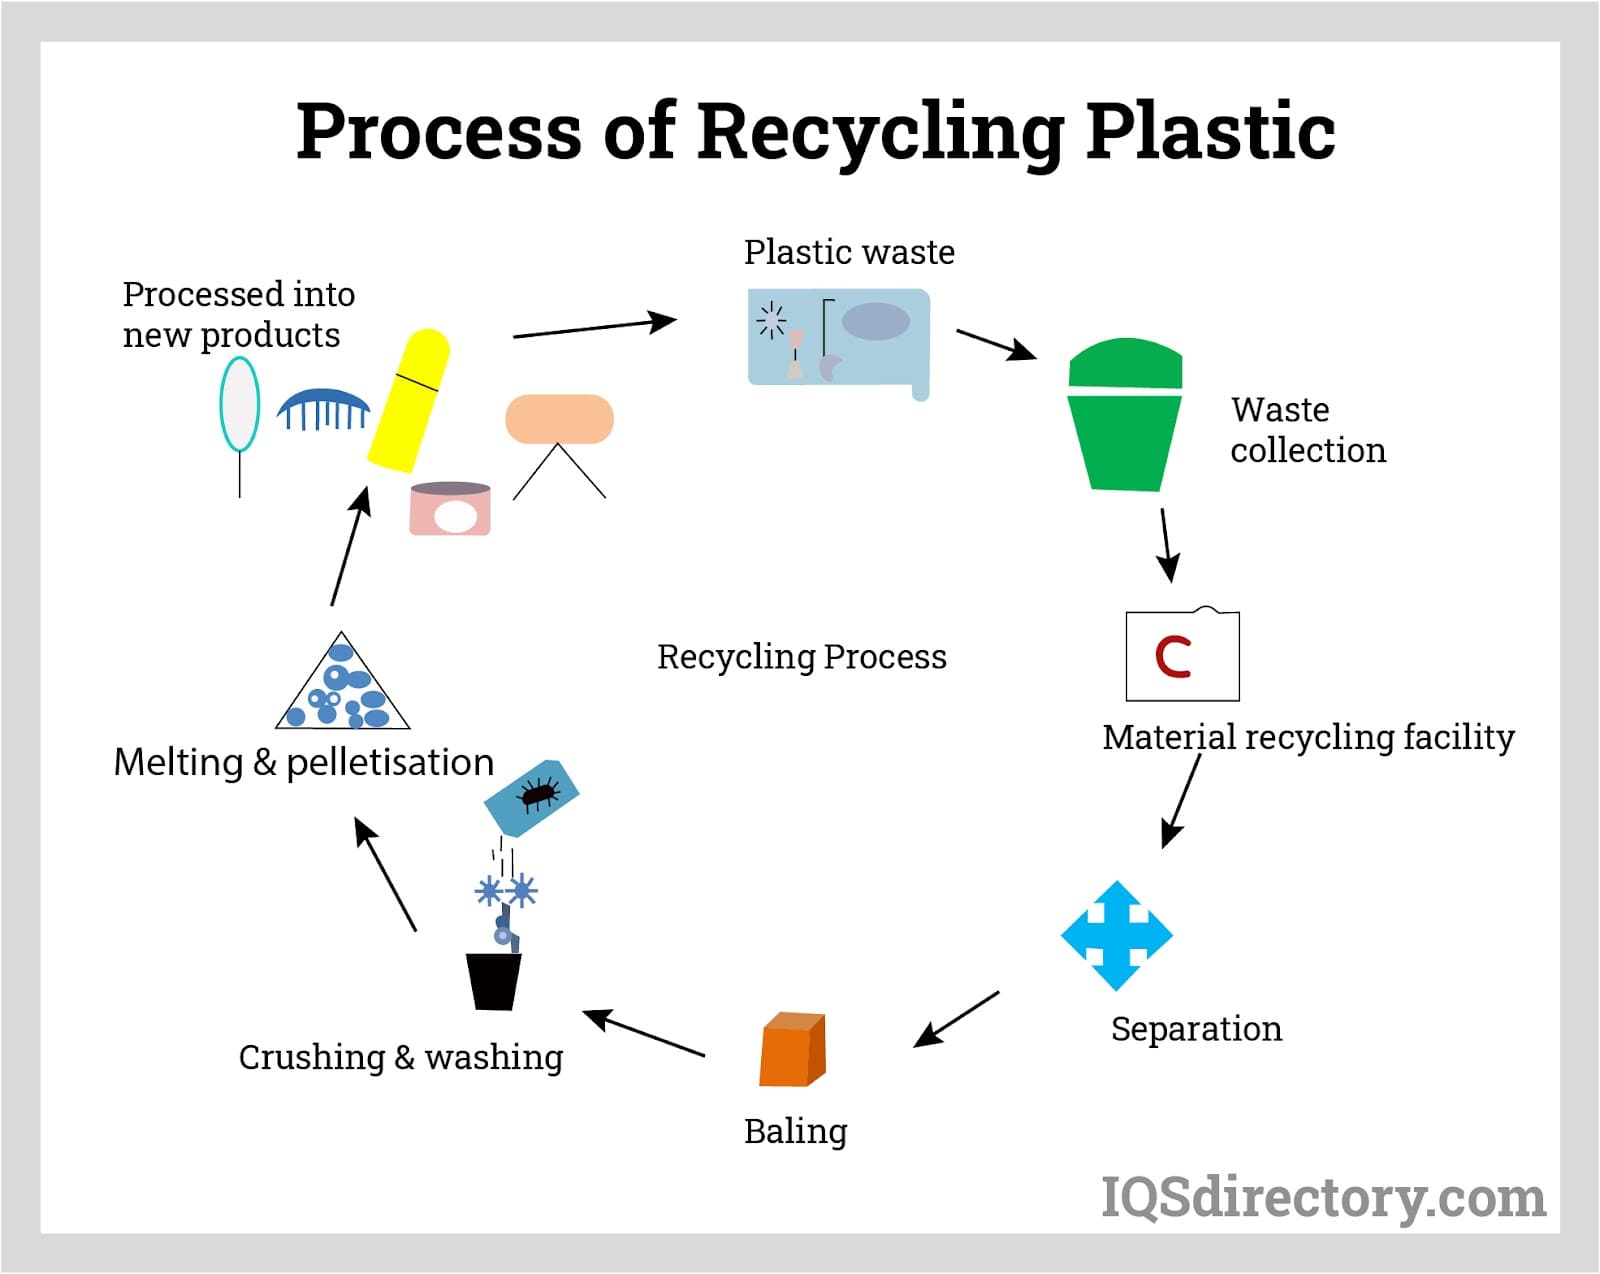 Process of Recycling Plastic